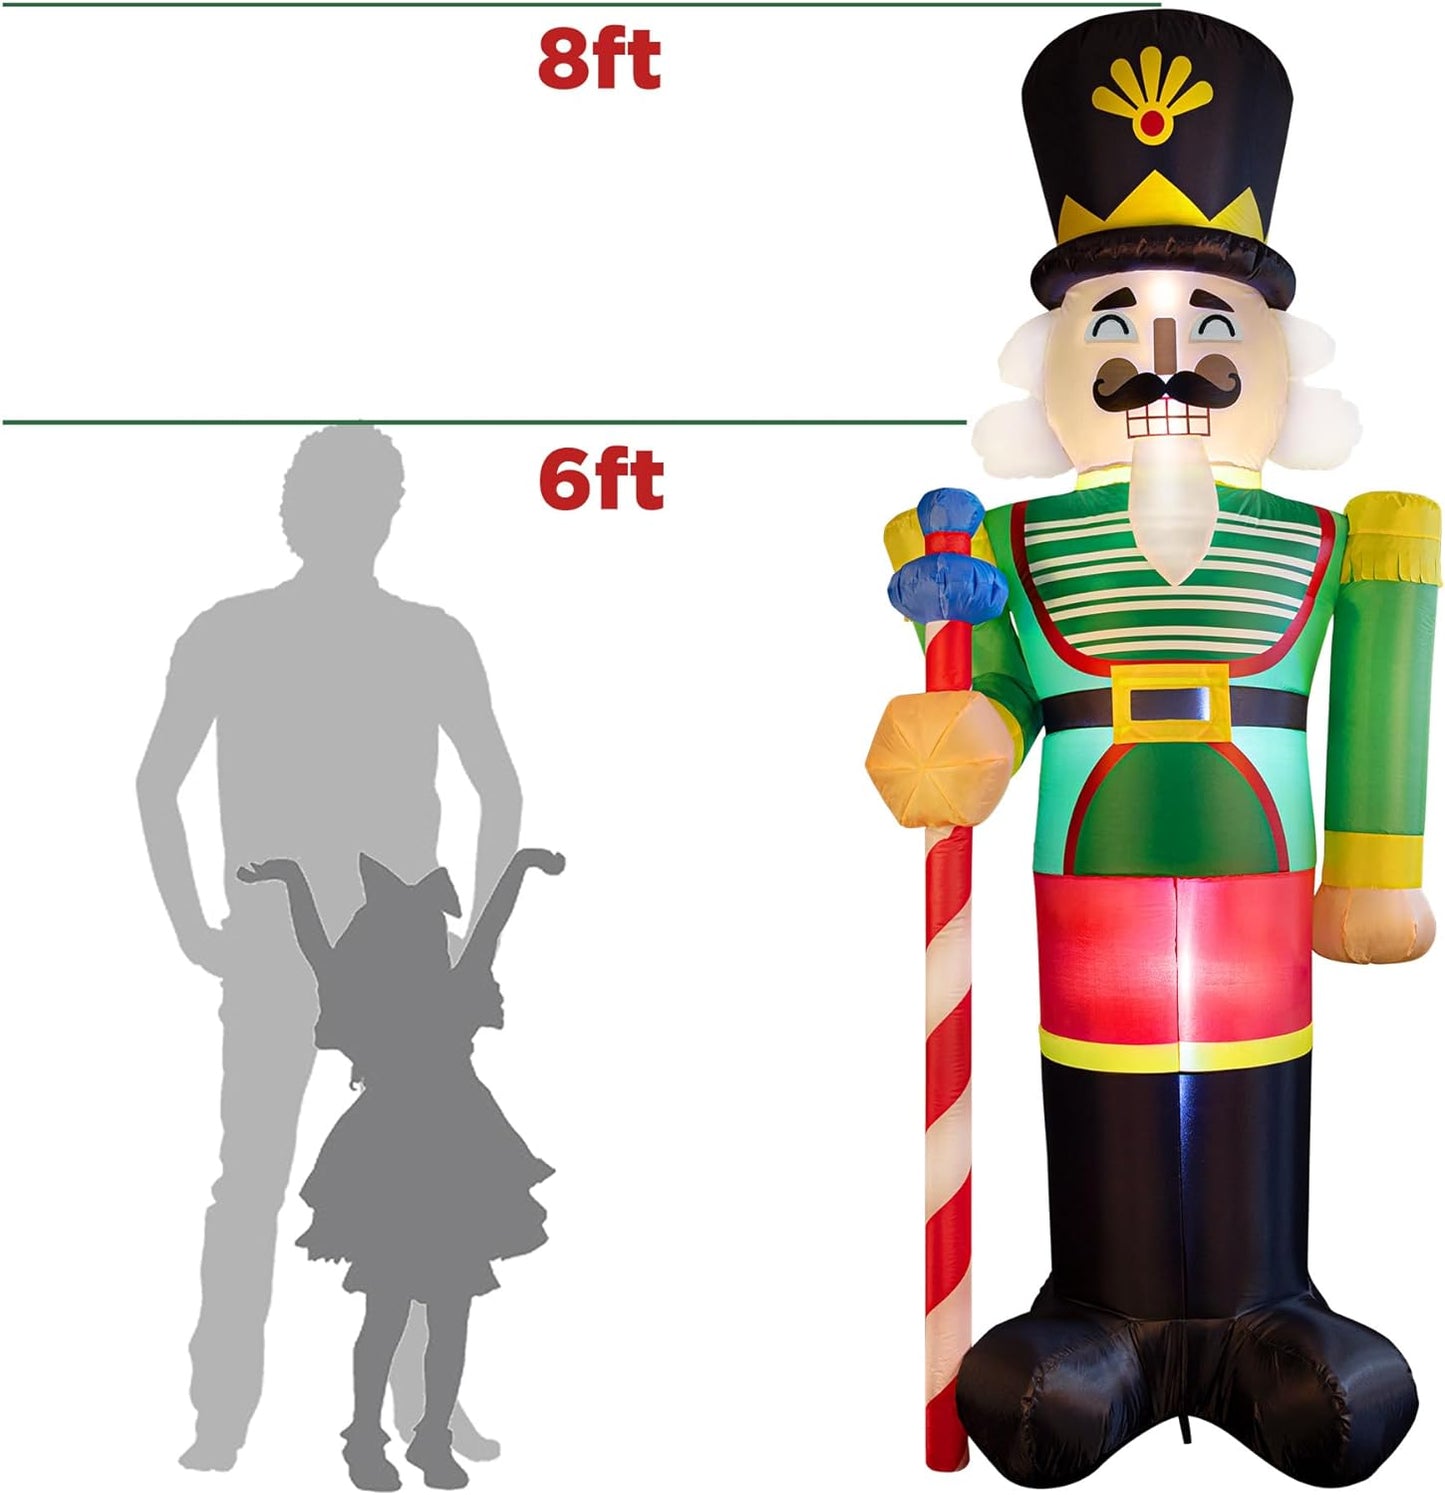 Sunlit 8ft Giant Christmas Inflatable Nutcracker Soldier with Replaceable Eyes, Lighted Yard Outdoor Holiday Decoration with Blower and Adaptor for Indoor Porch Lawn, Red and Green